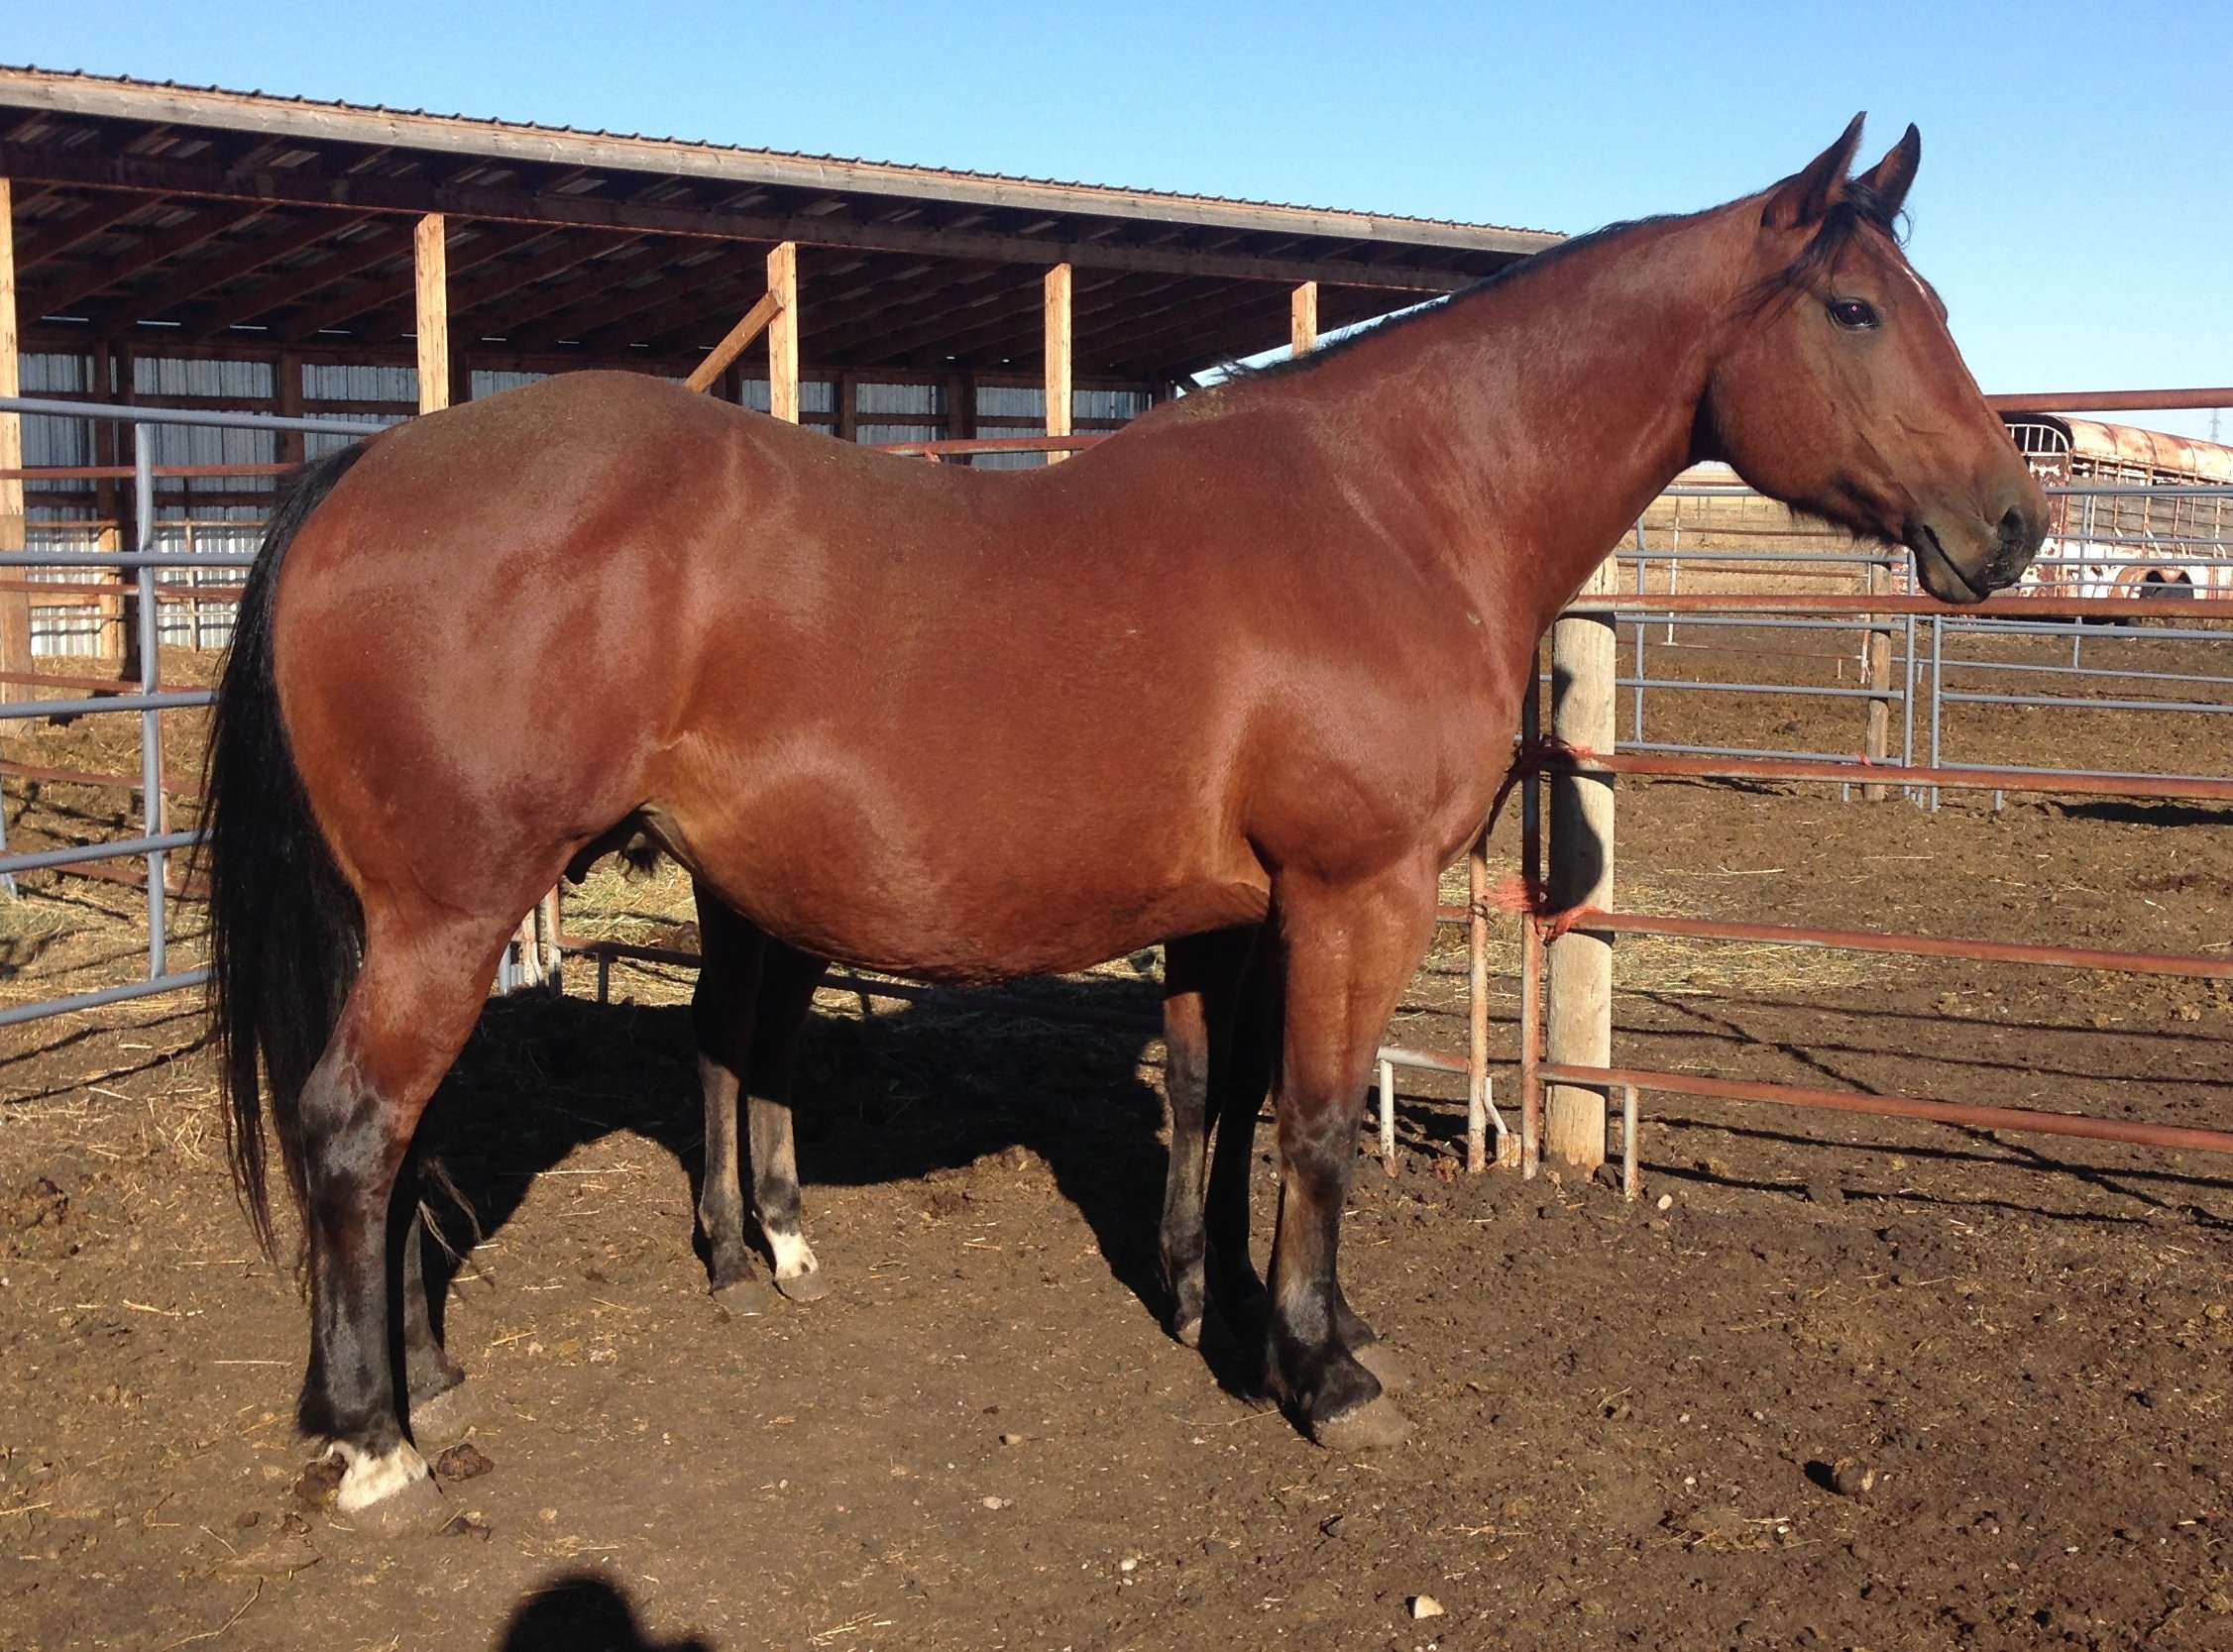 MANDY - 2005 mare with severe trust issues and because of this she will stay here.